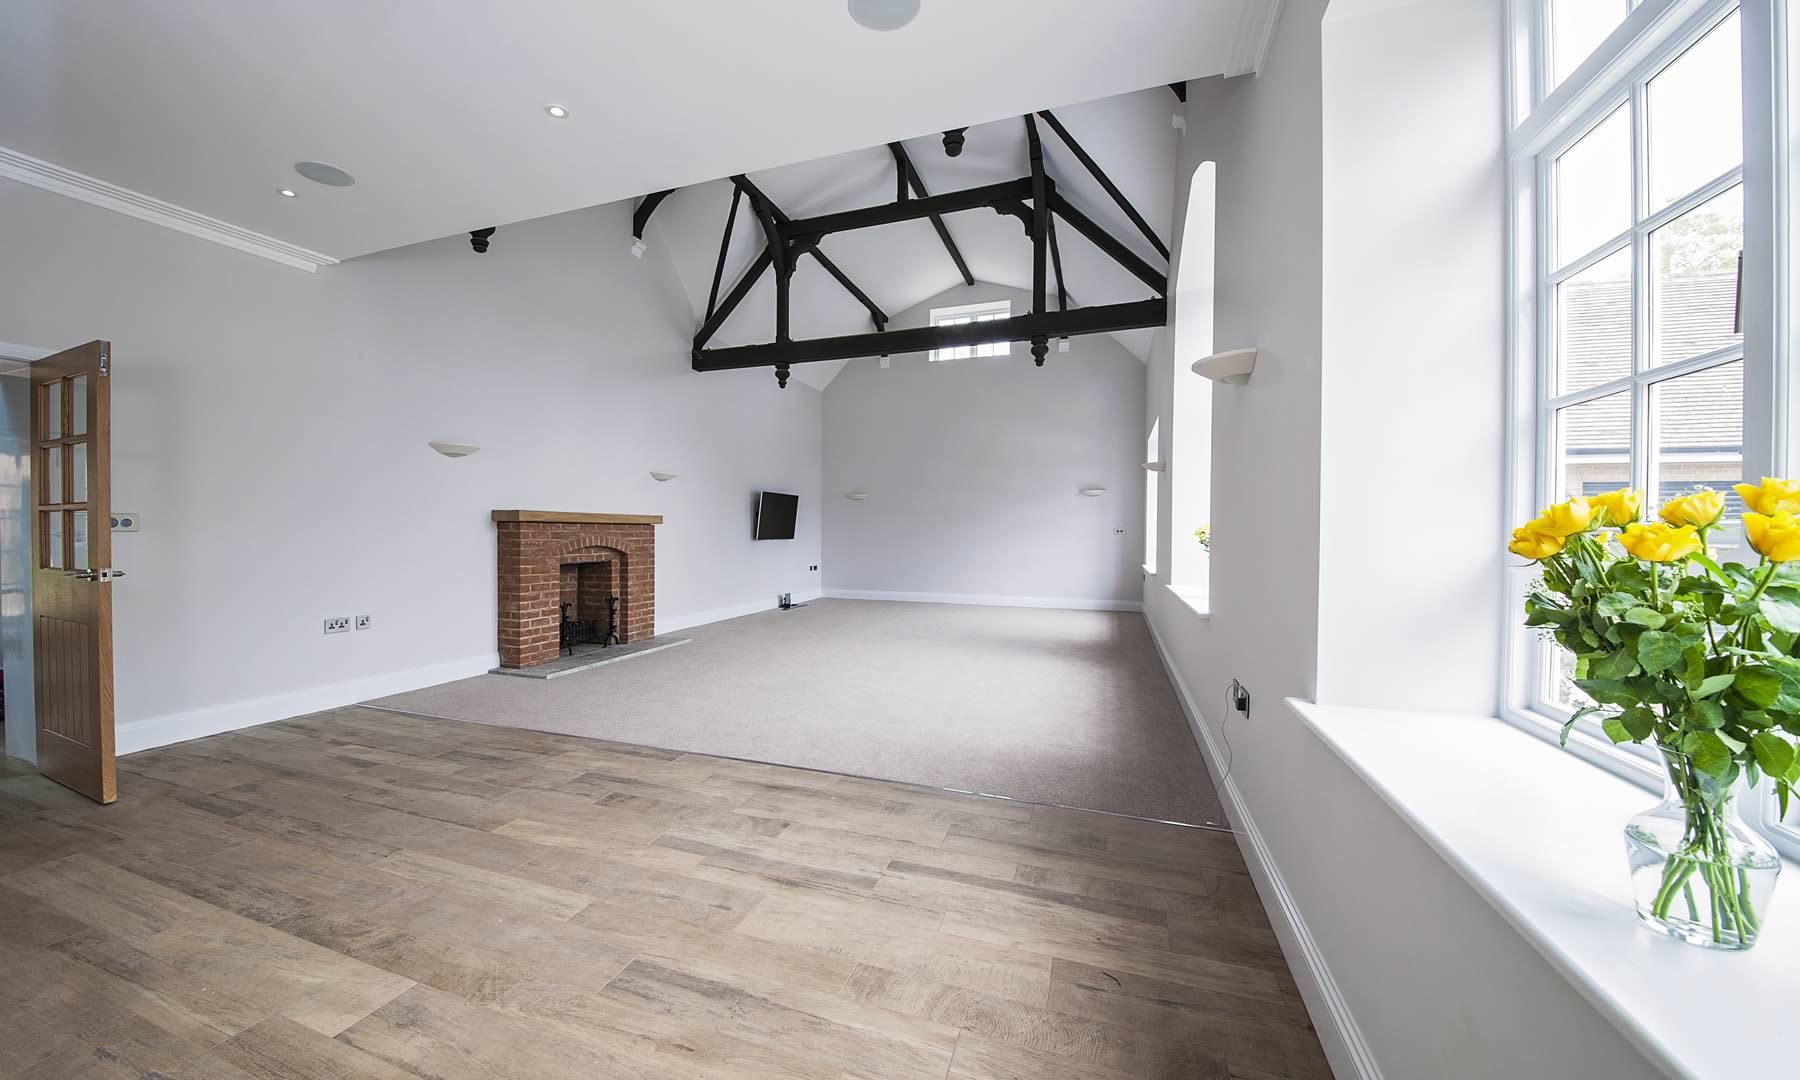 Spacious empty living room with a fire place and structural beams on the ceiling.